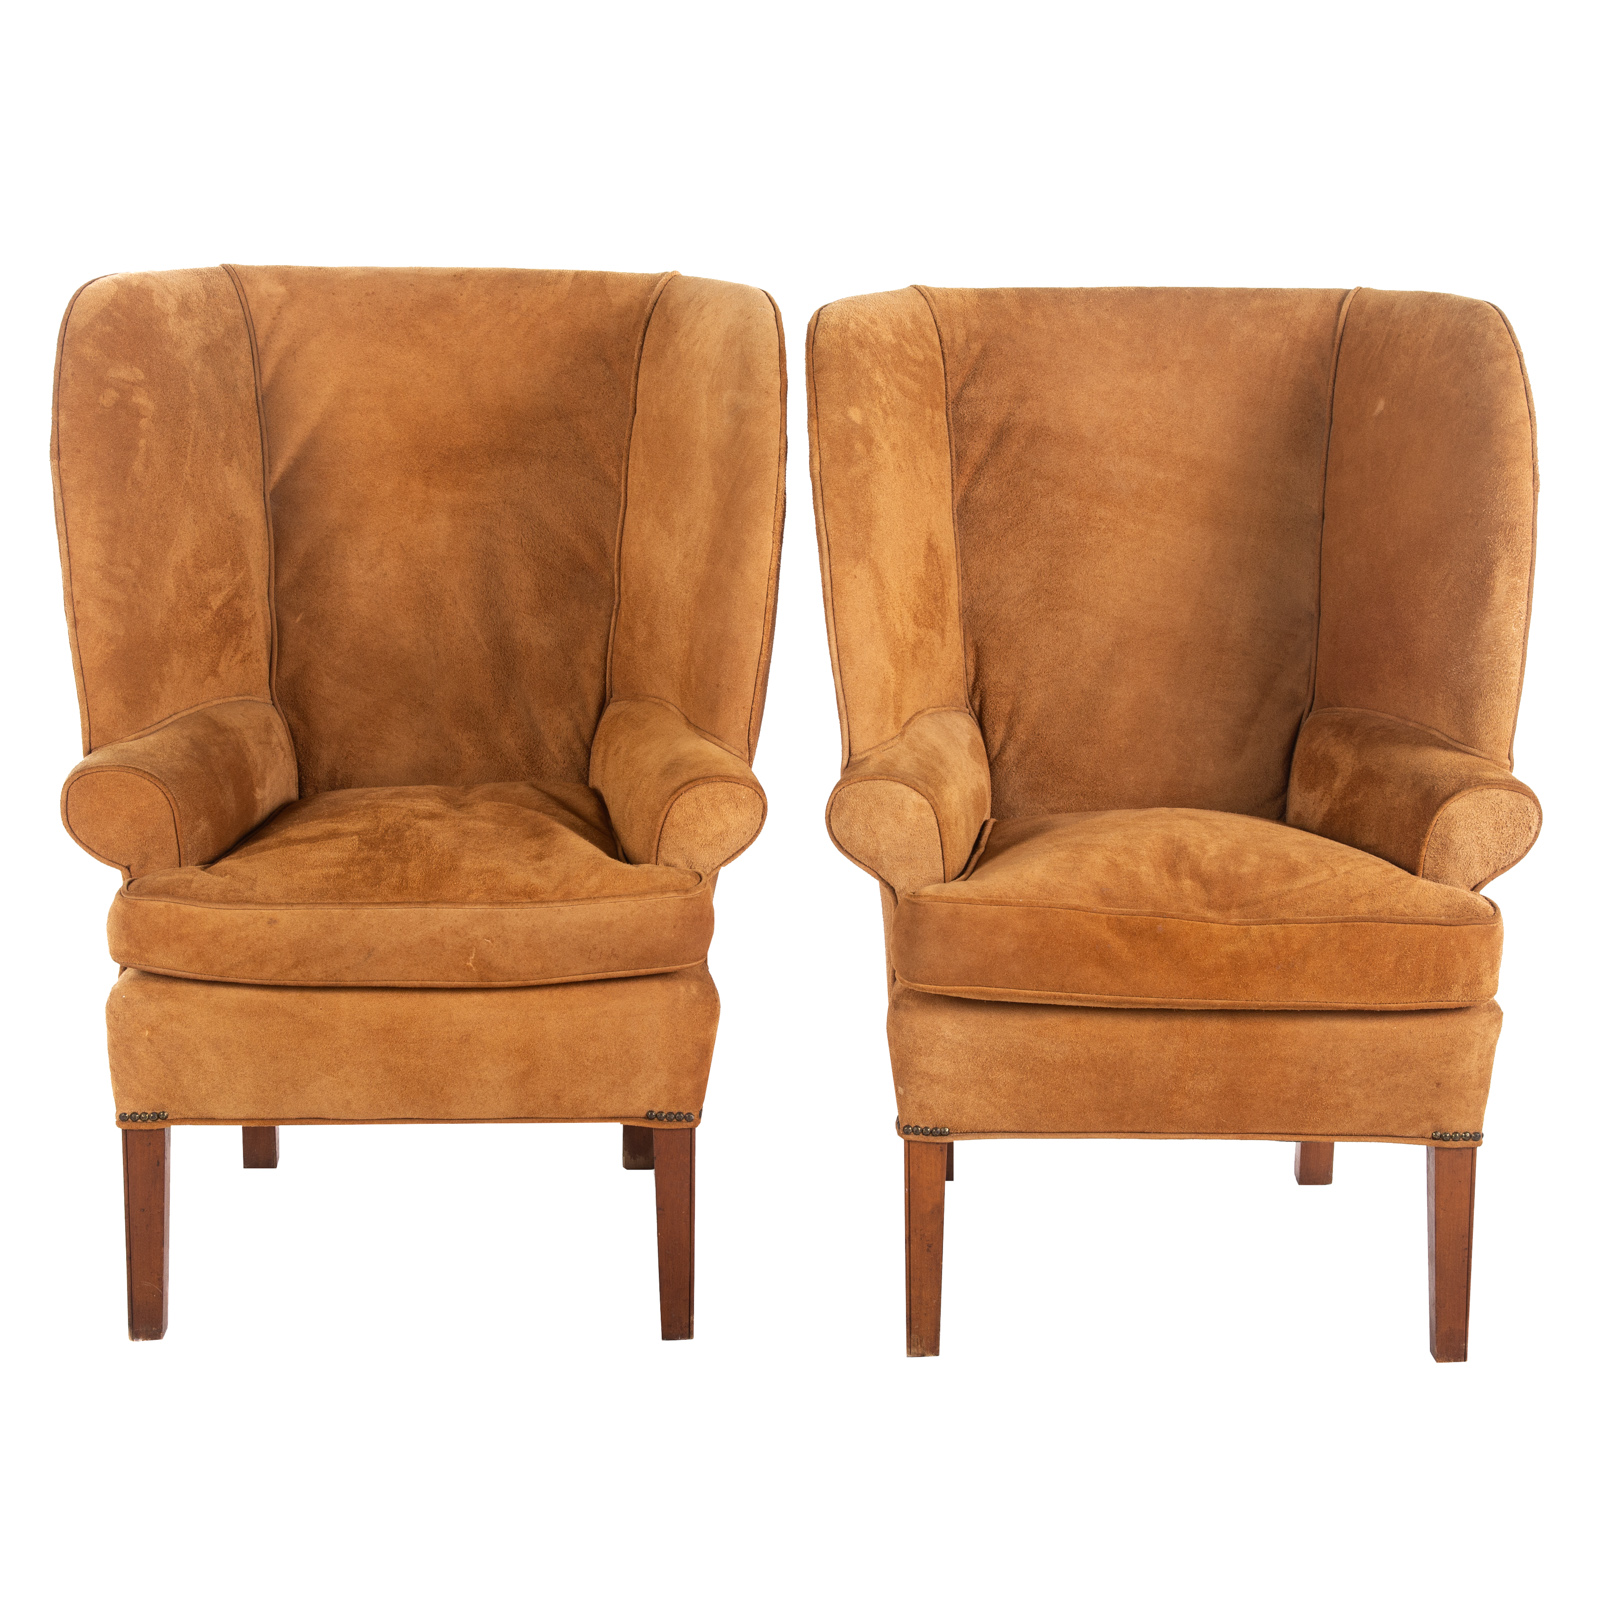 A PAIR OF CONTEMPORARY SUEDE UPHOLSTERED